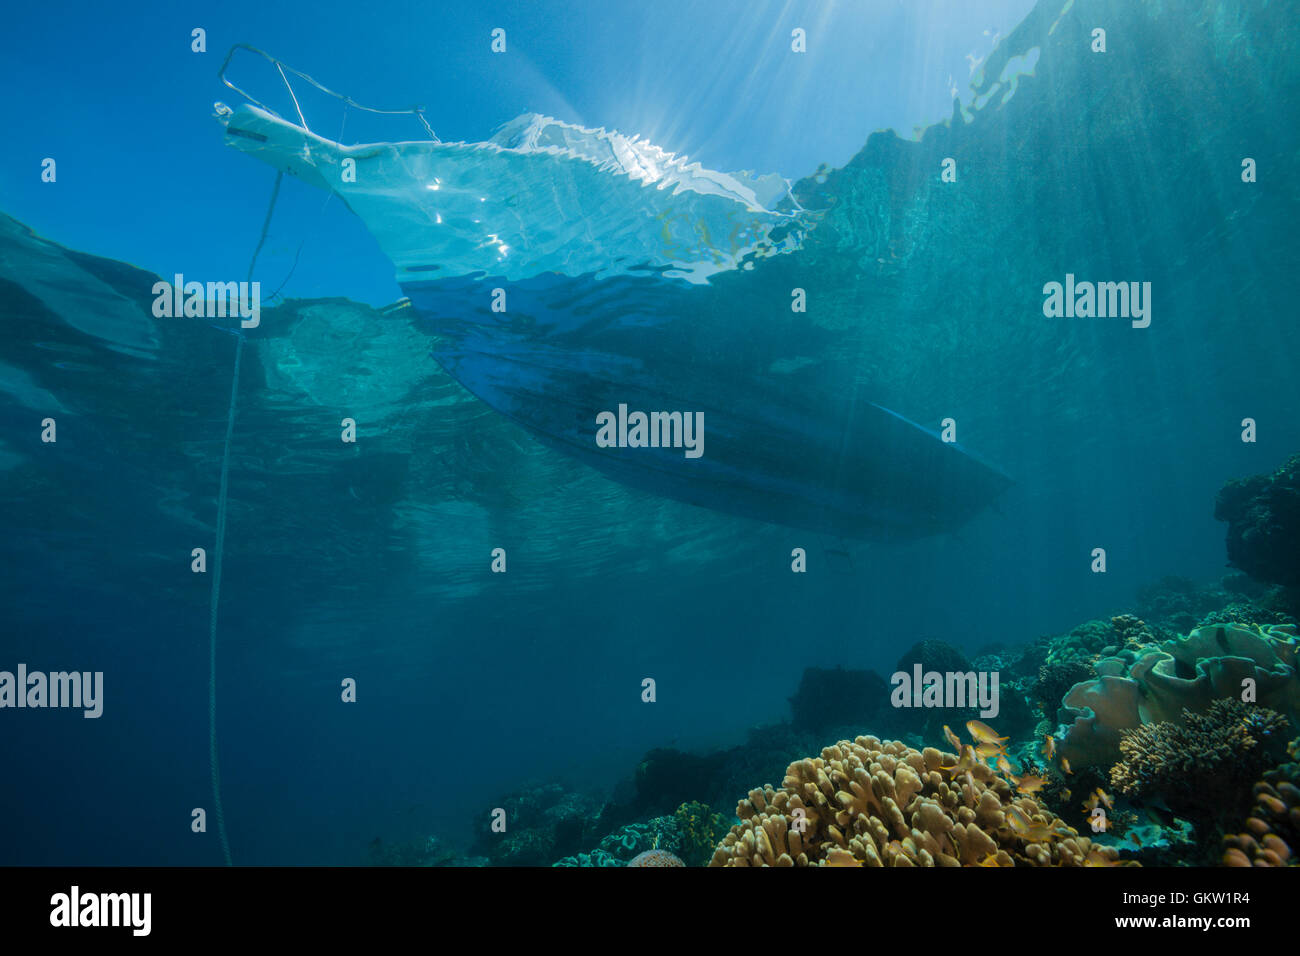 Diving Boat over Coral Reef, Ambon, Moluccas, Indonesia Stock Photo